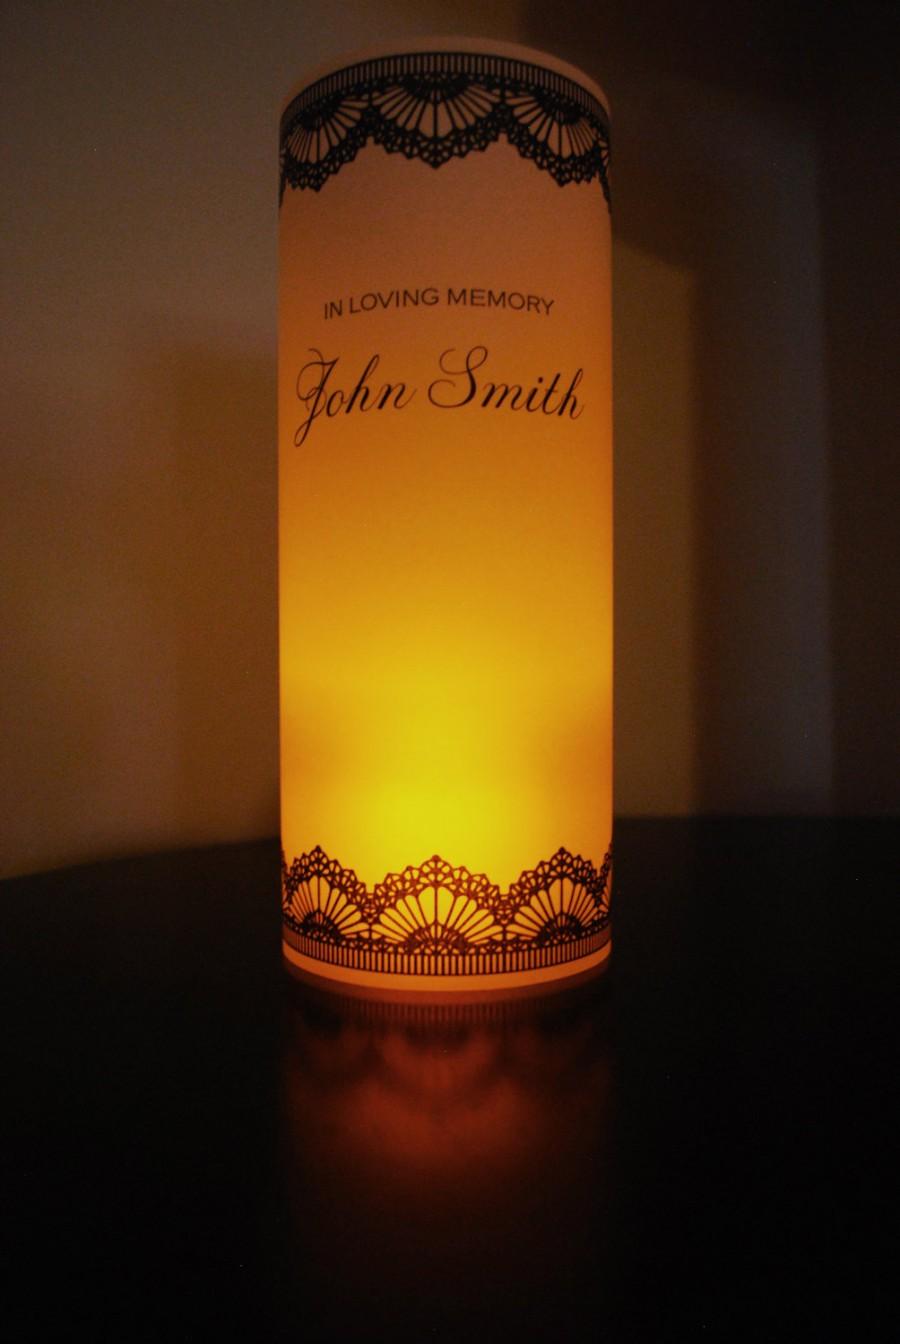 Mariage - In Loving Memory Vellum Paper Luminary - Memorial Remembrance LED Candle Luminaries Wedding Honor Loved One Mom Dad Grandparents Aunt Uncle